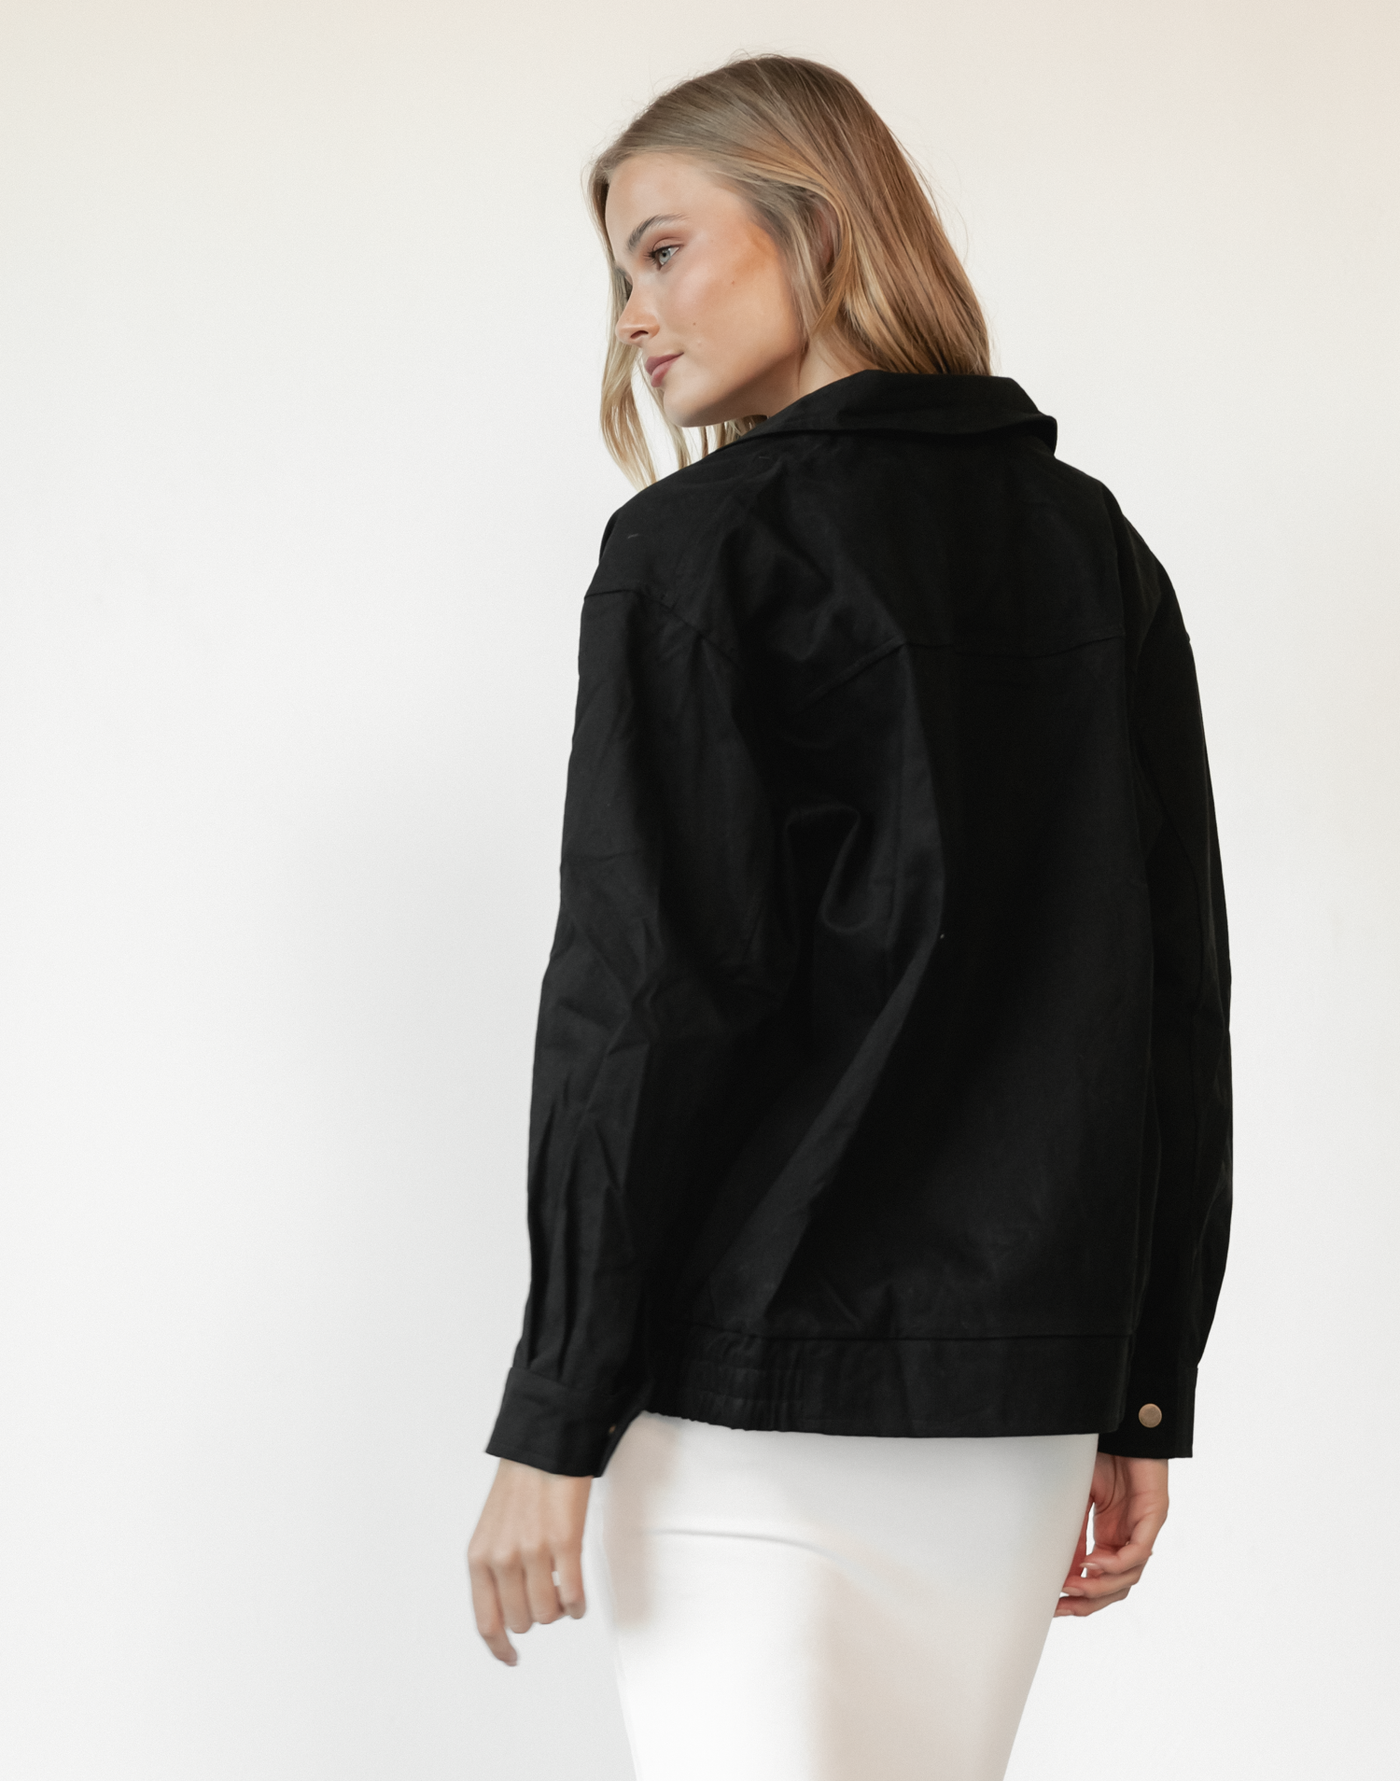 Clermont Jacket (Black) - Black Jacket - Women's Outerwear - Charcoal Clothing